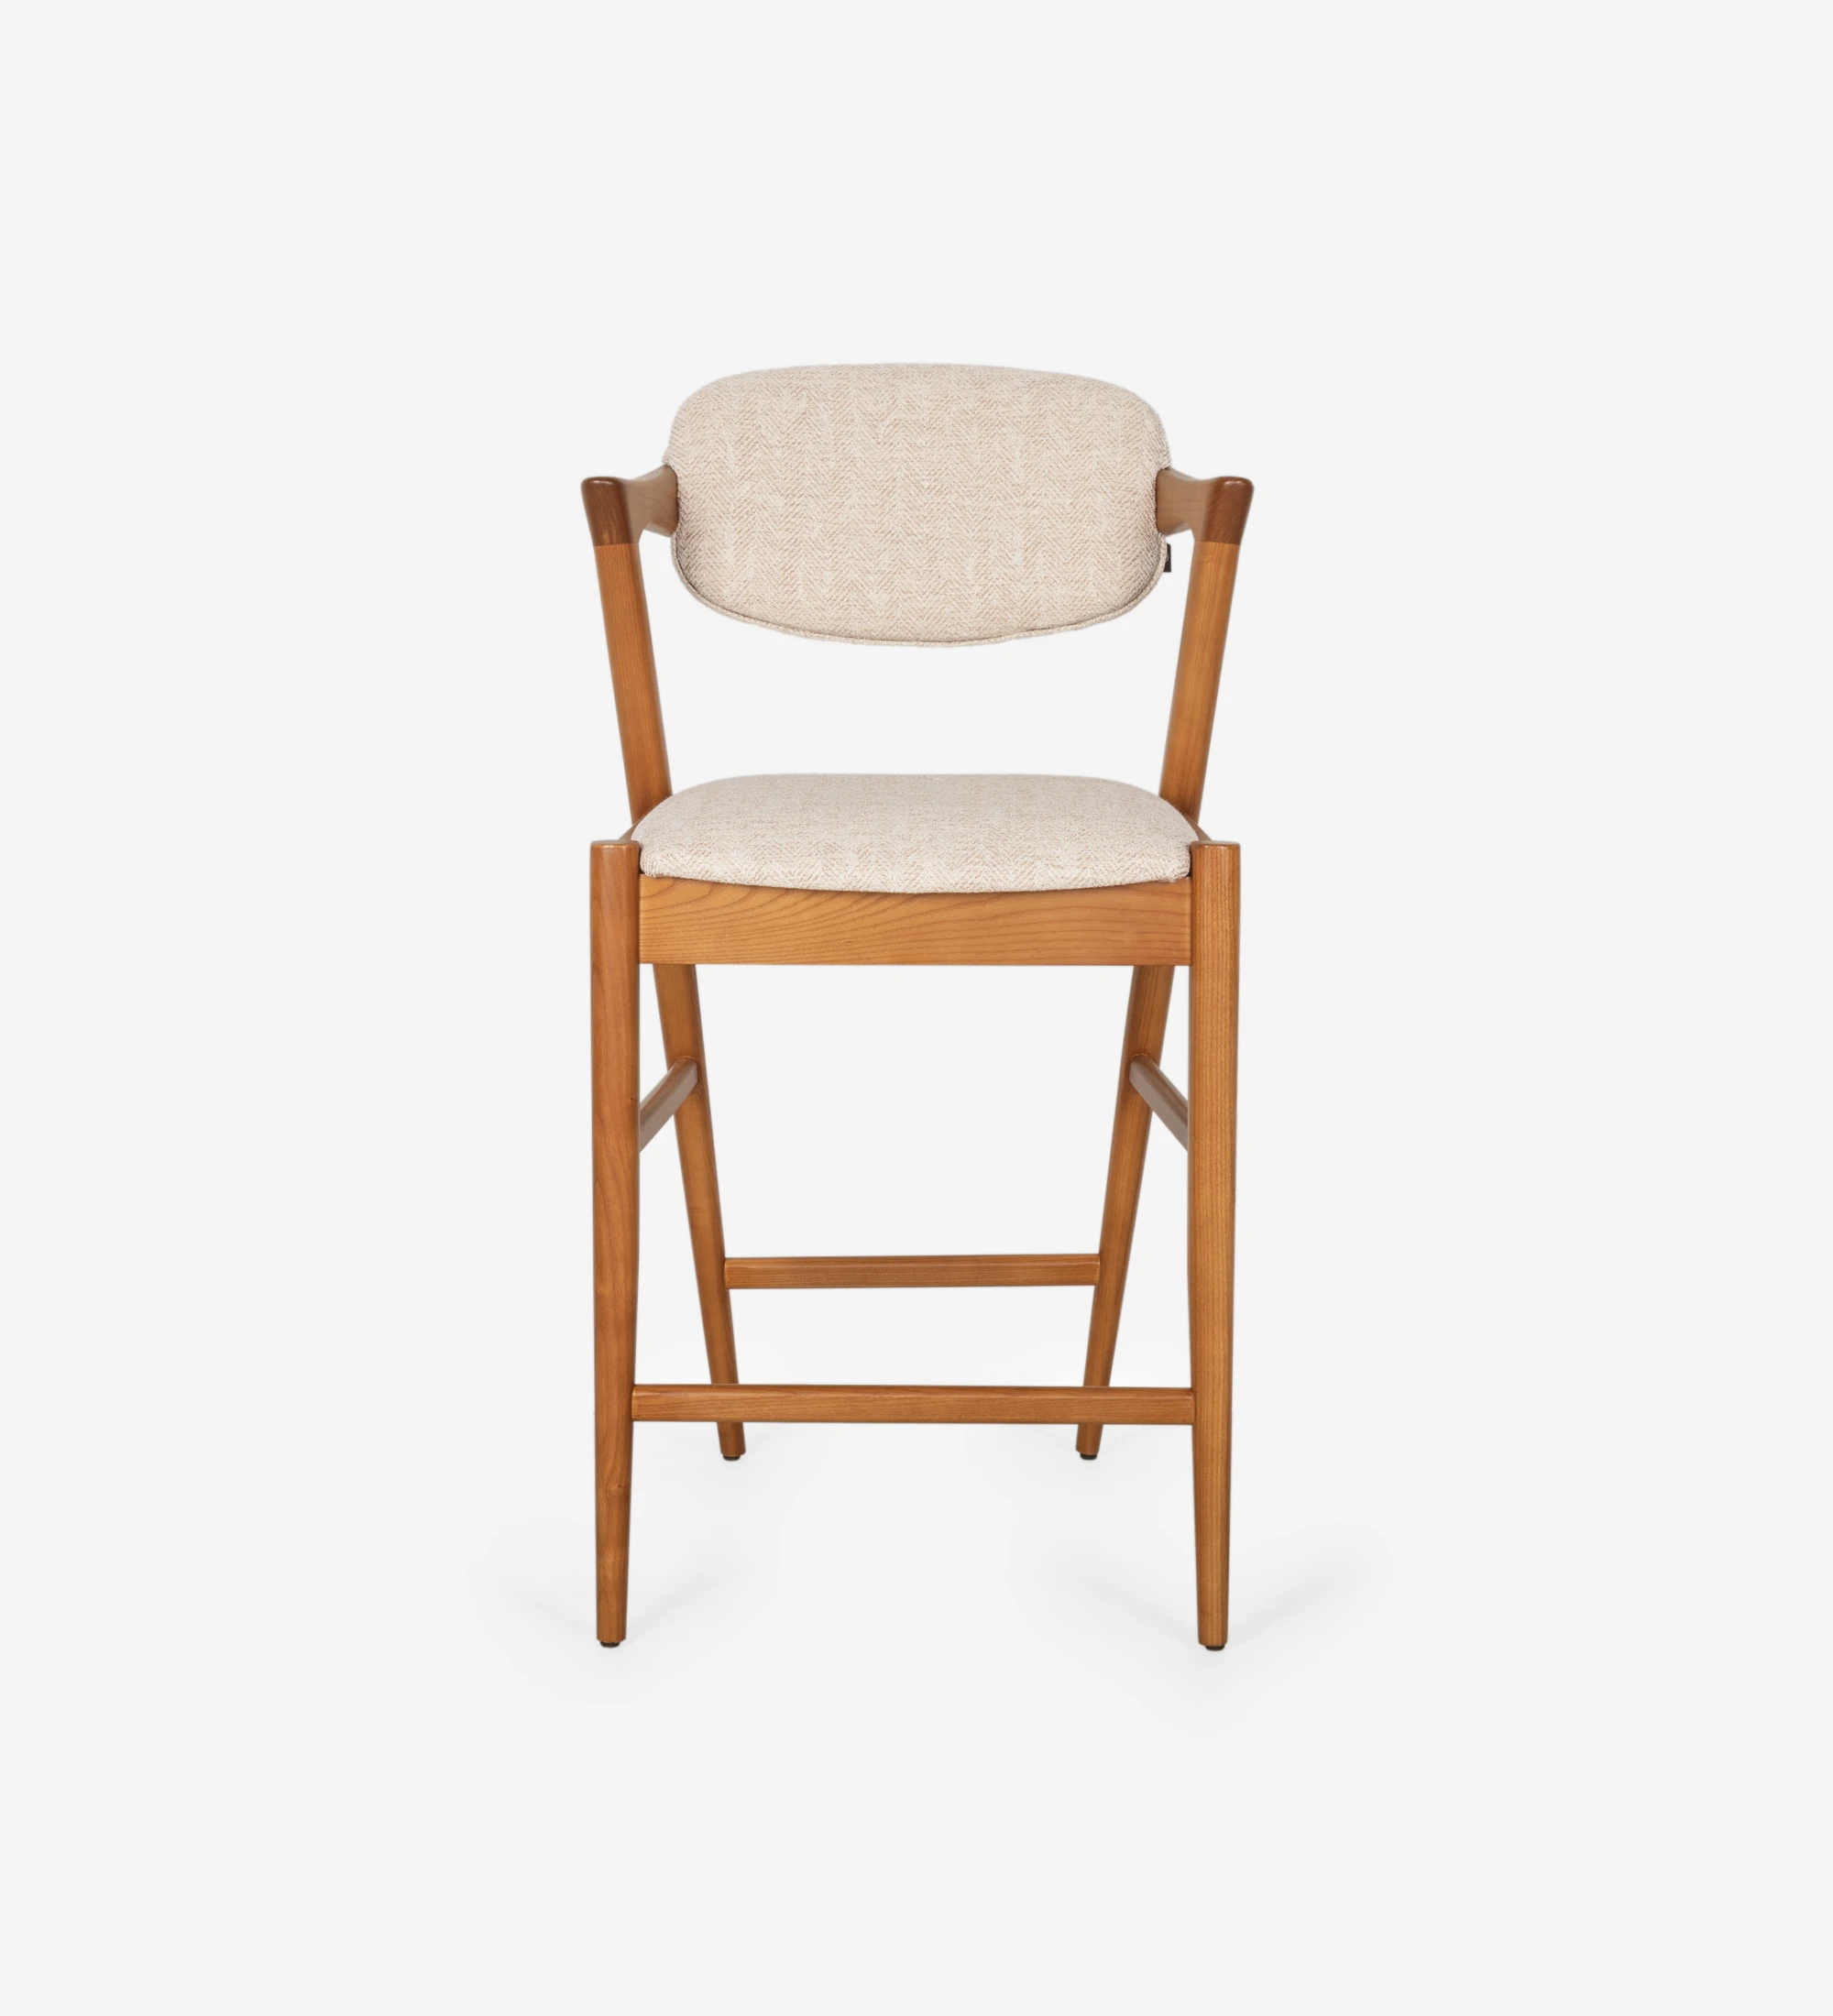 Stool in honey-colored ash wood, with seat and back upholstered in fabric.